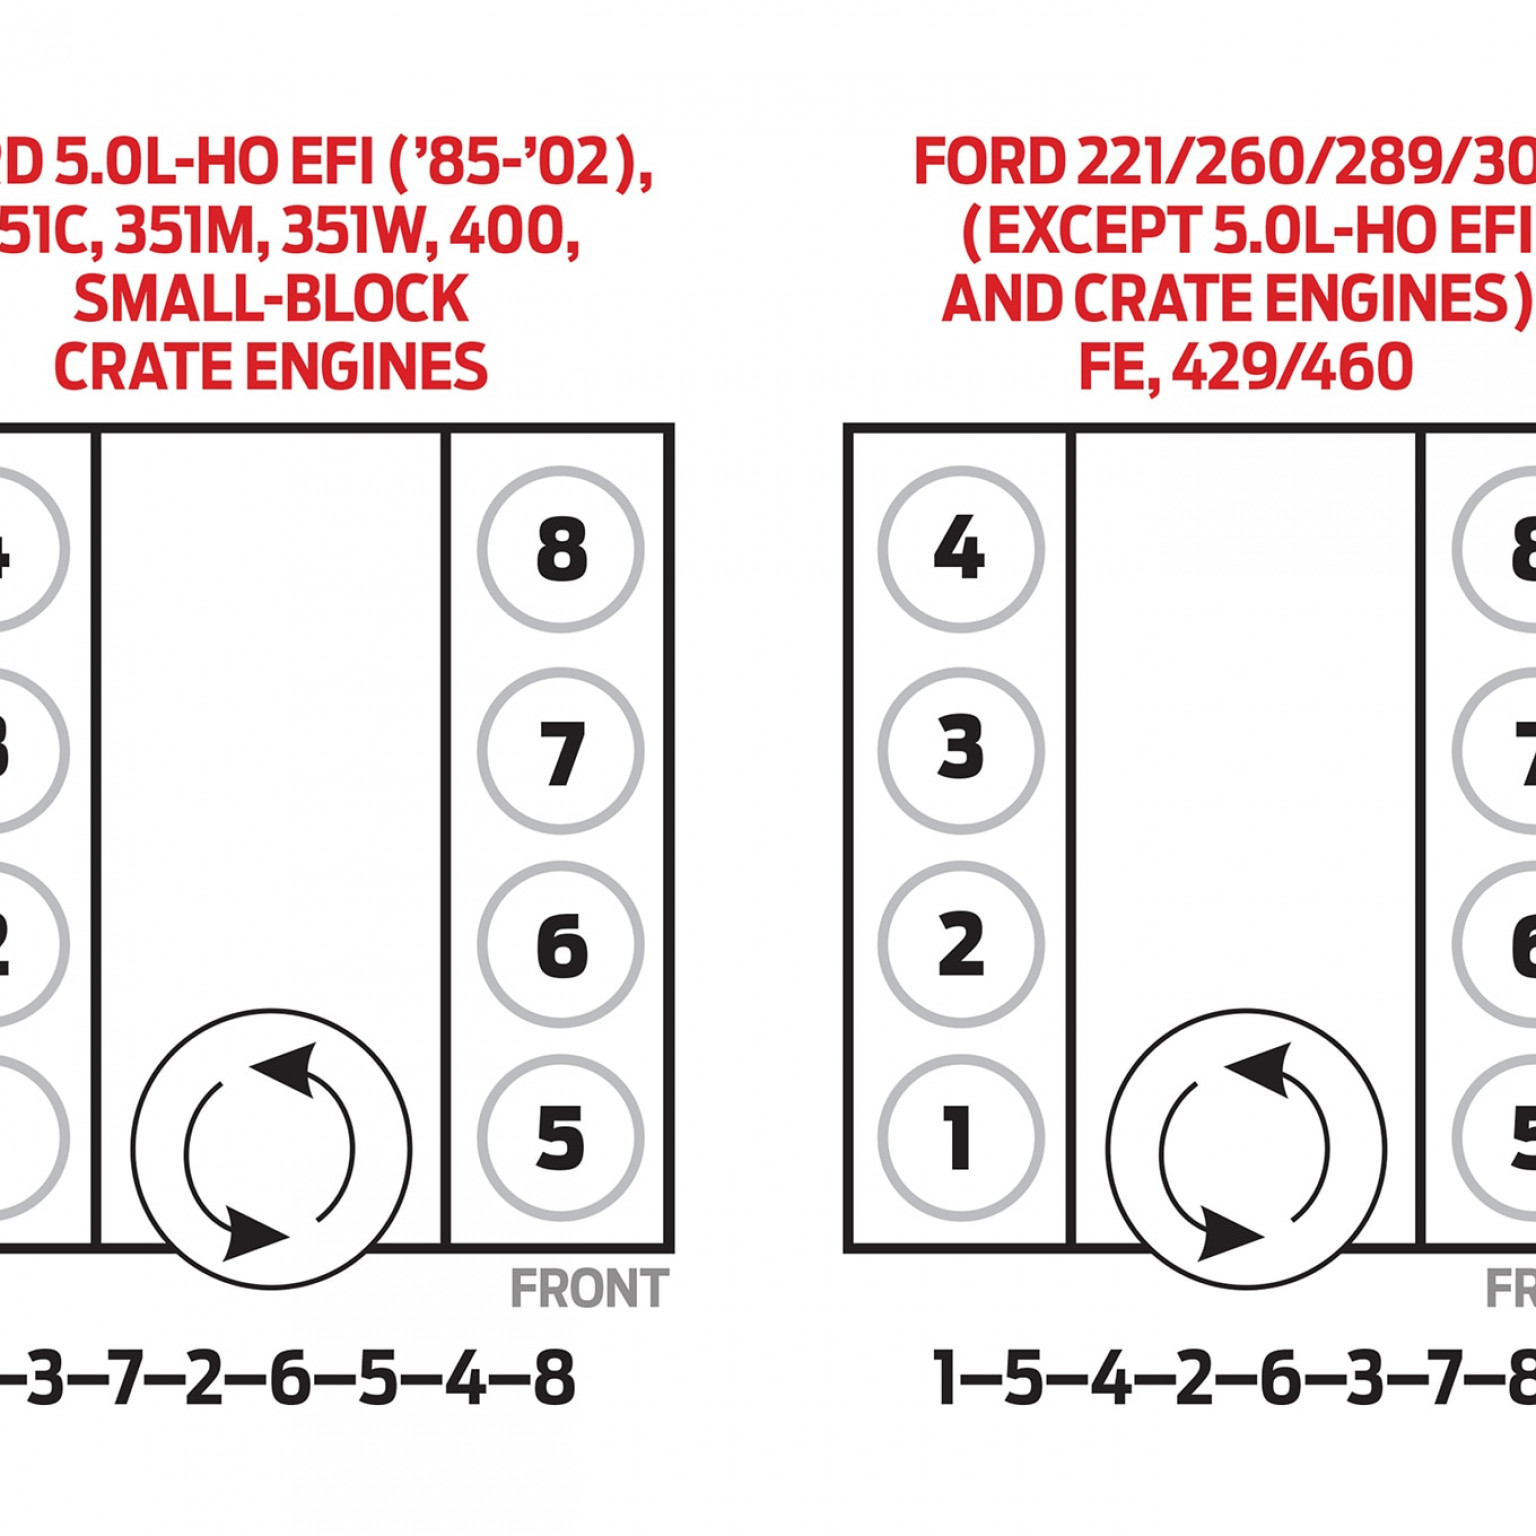 1978 Ford 400 Firing Order | Wiring and Printable